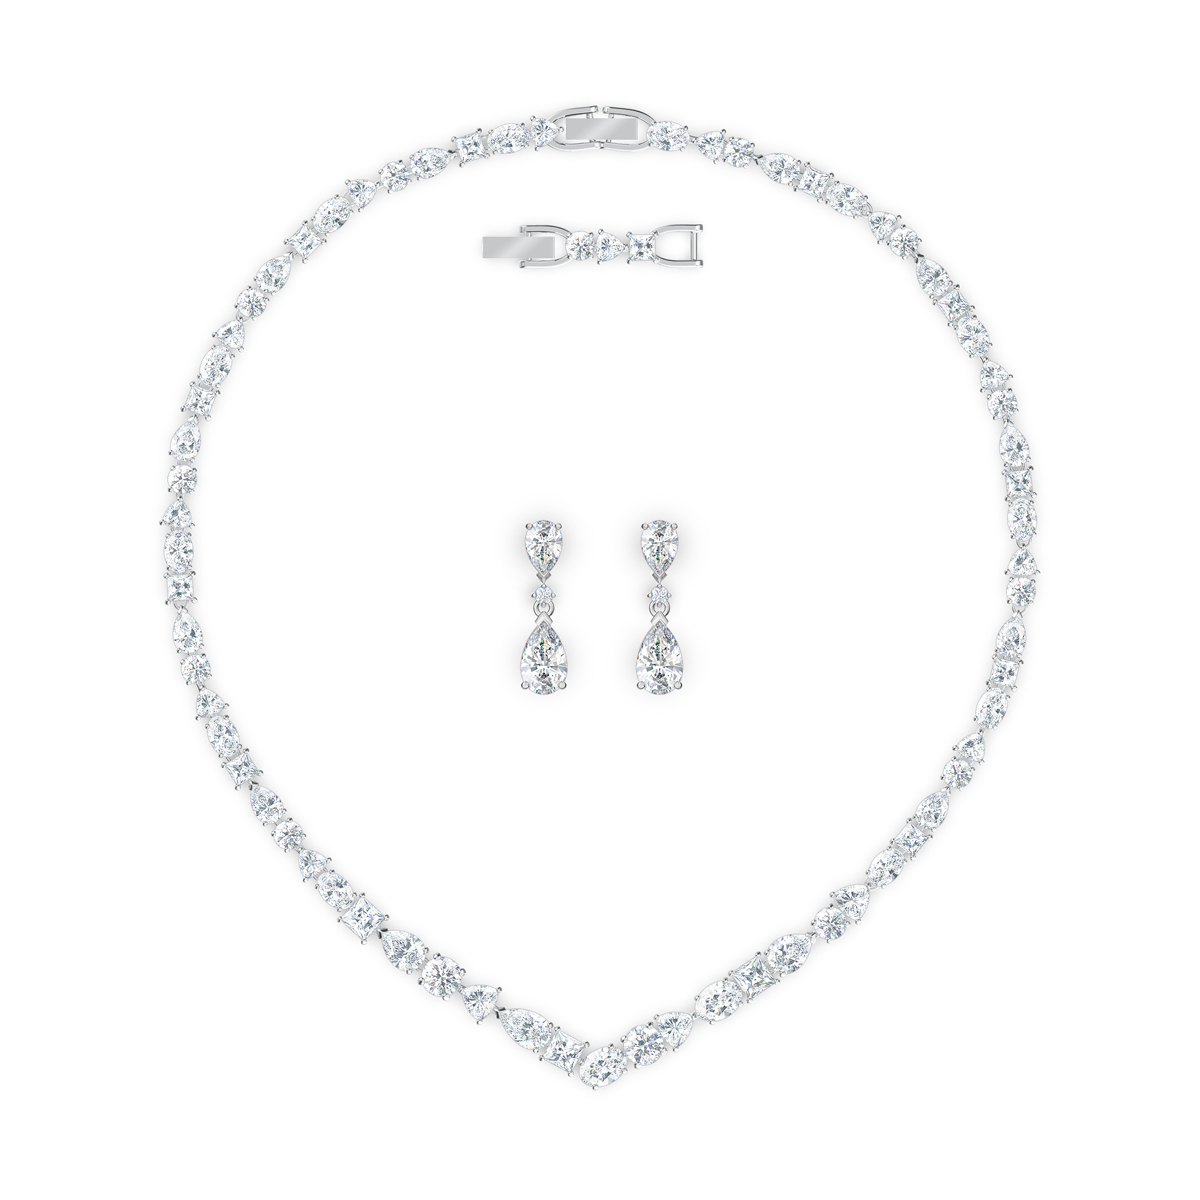 Swarovski Tennis Deluxe V Mixed Necklace and Earrings Set, White, Rhodium Plated